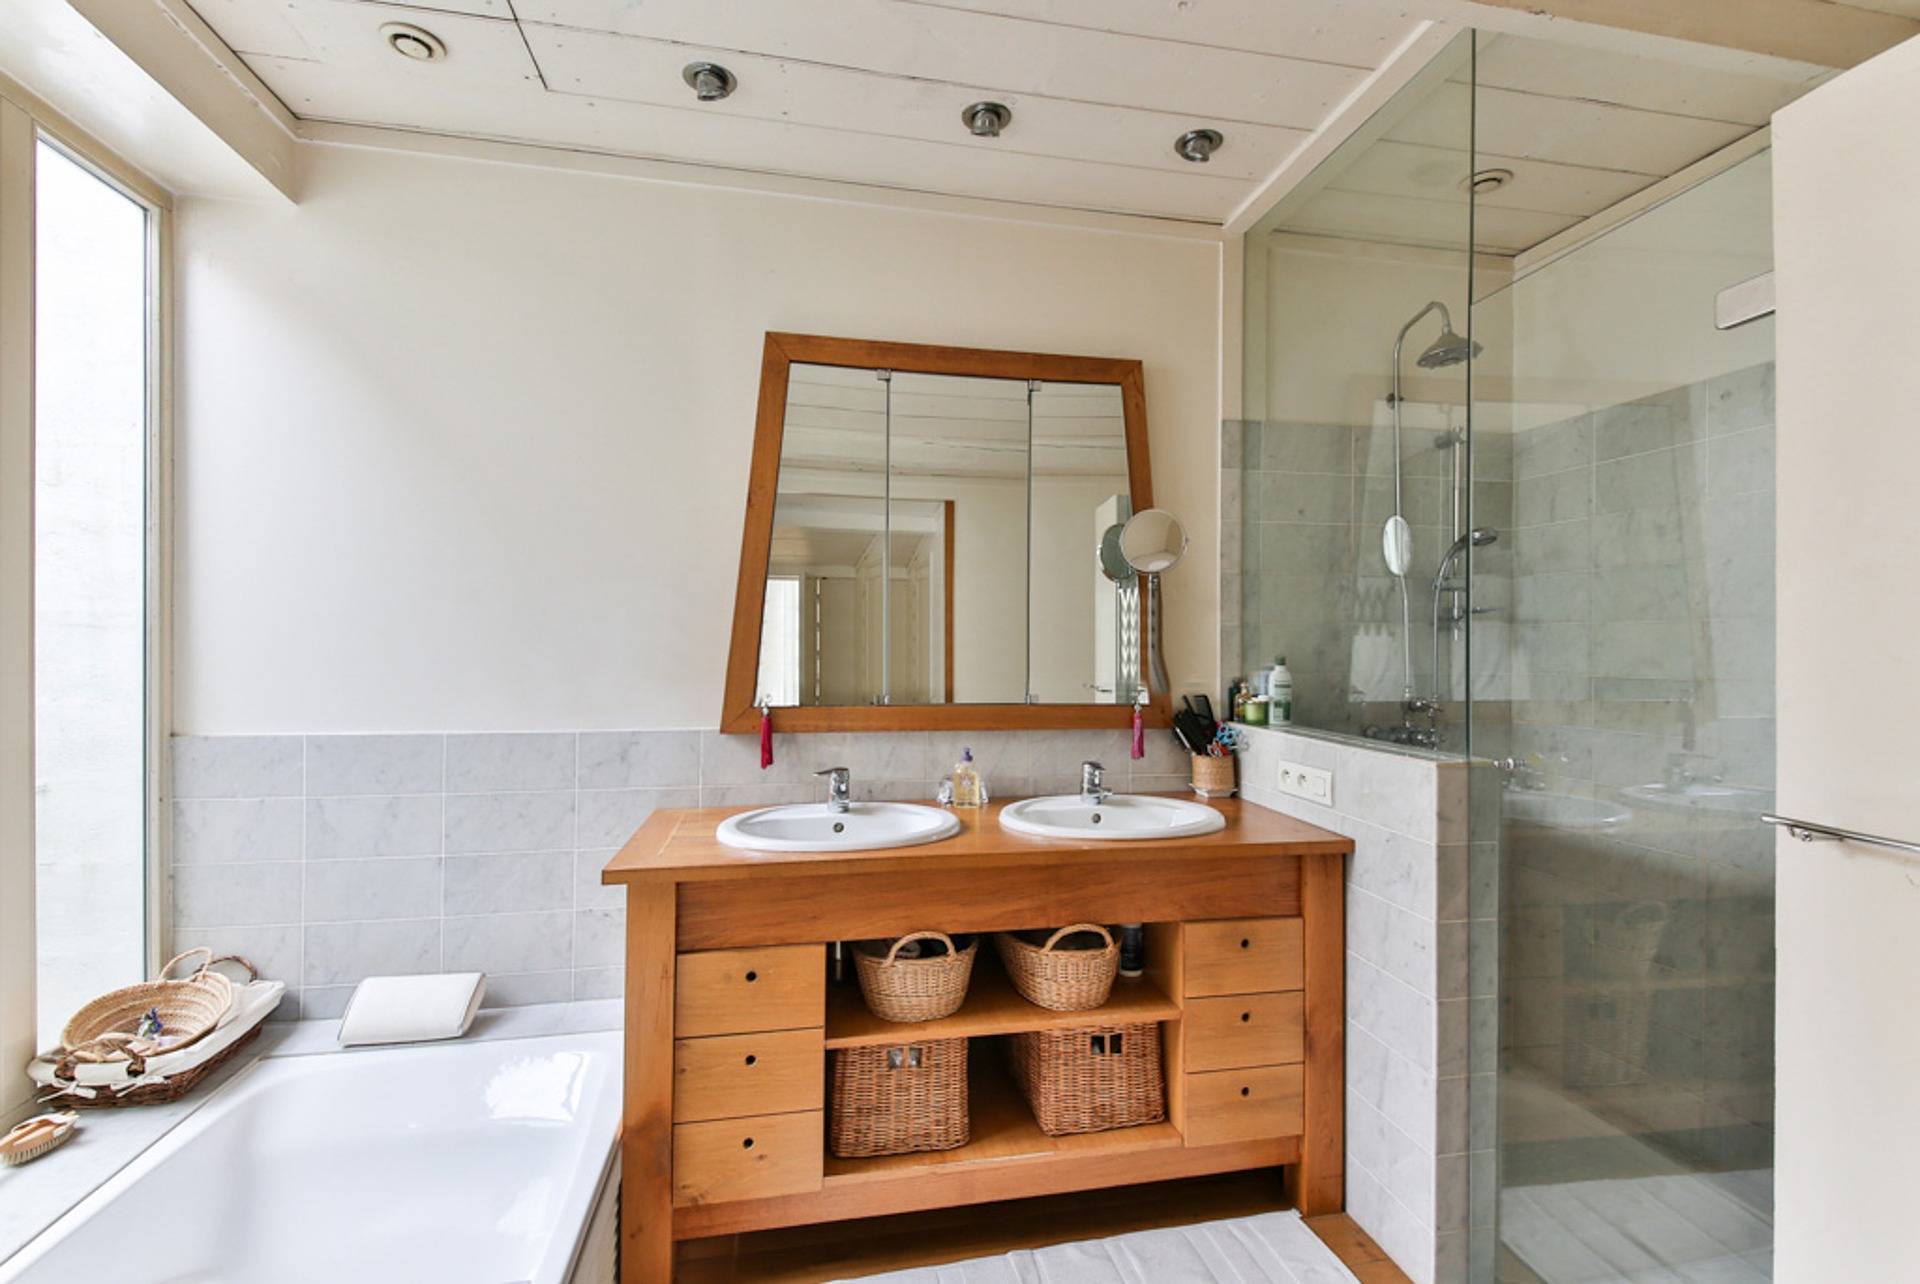 What Is The Best Layout For A Small Bathroom | JC Premier Melbourne